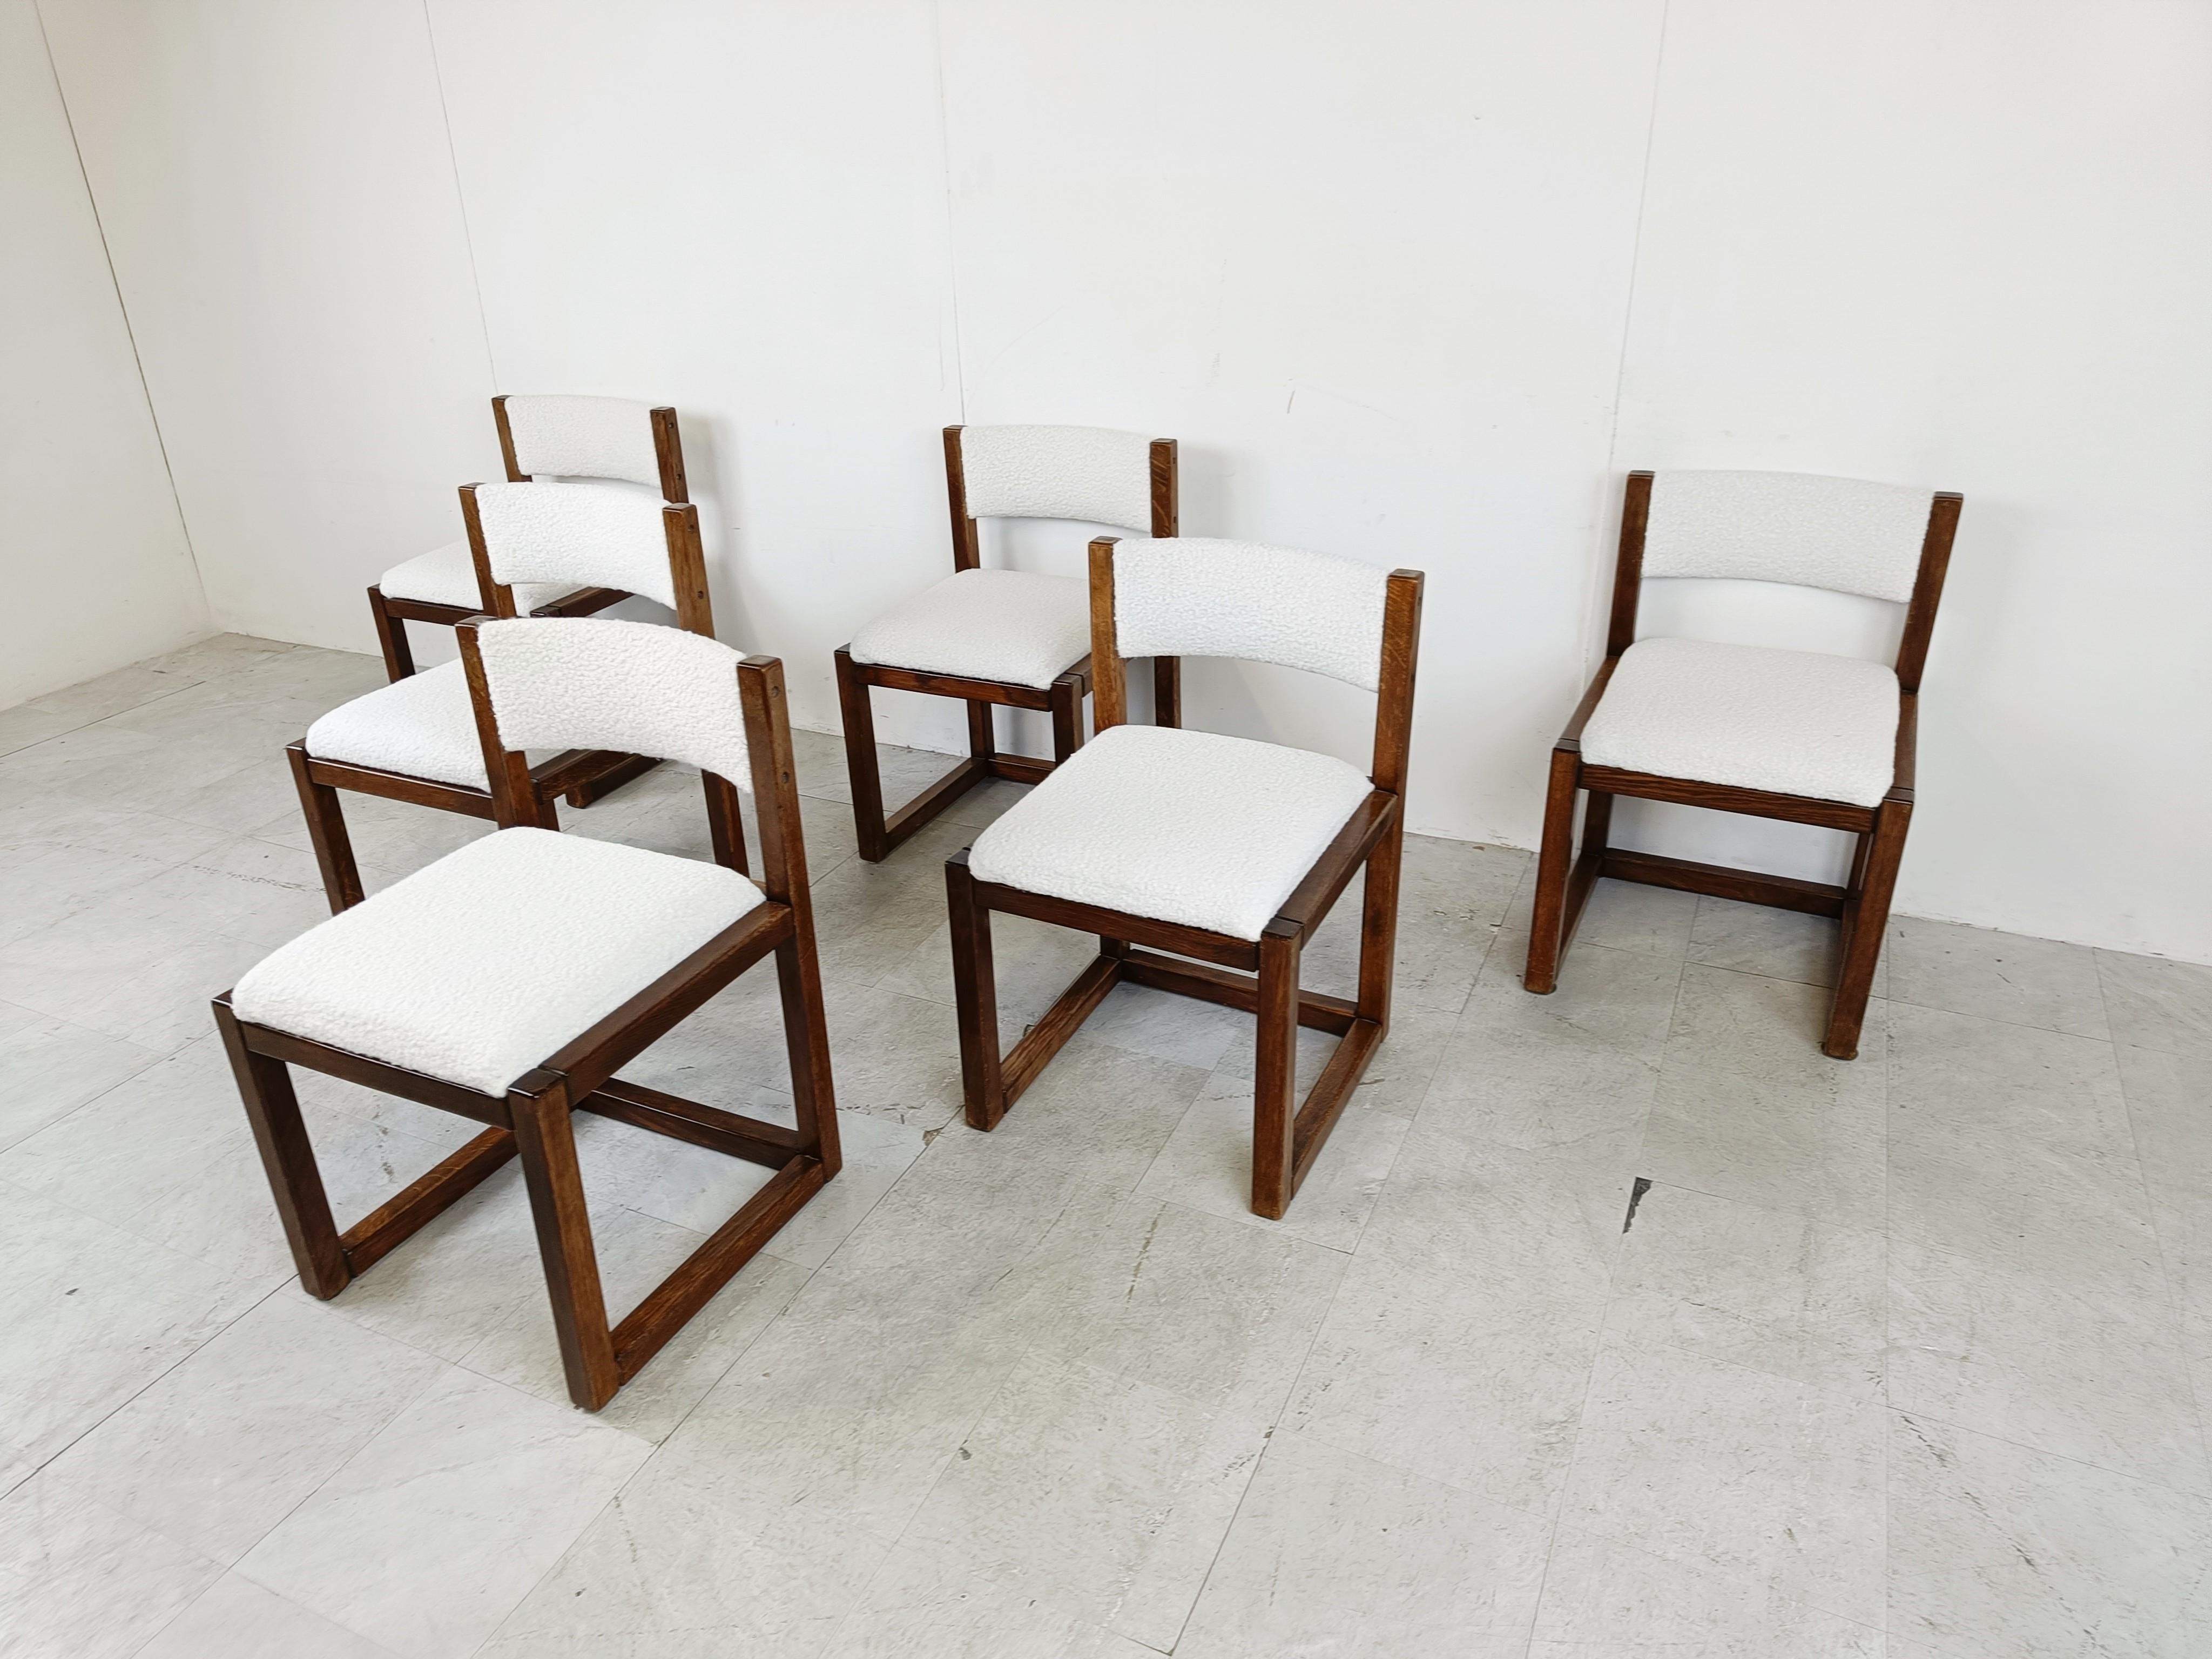 Mid-20th Century Vintage Brutalist Dining Chairs, Set of 6 - 1960s